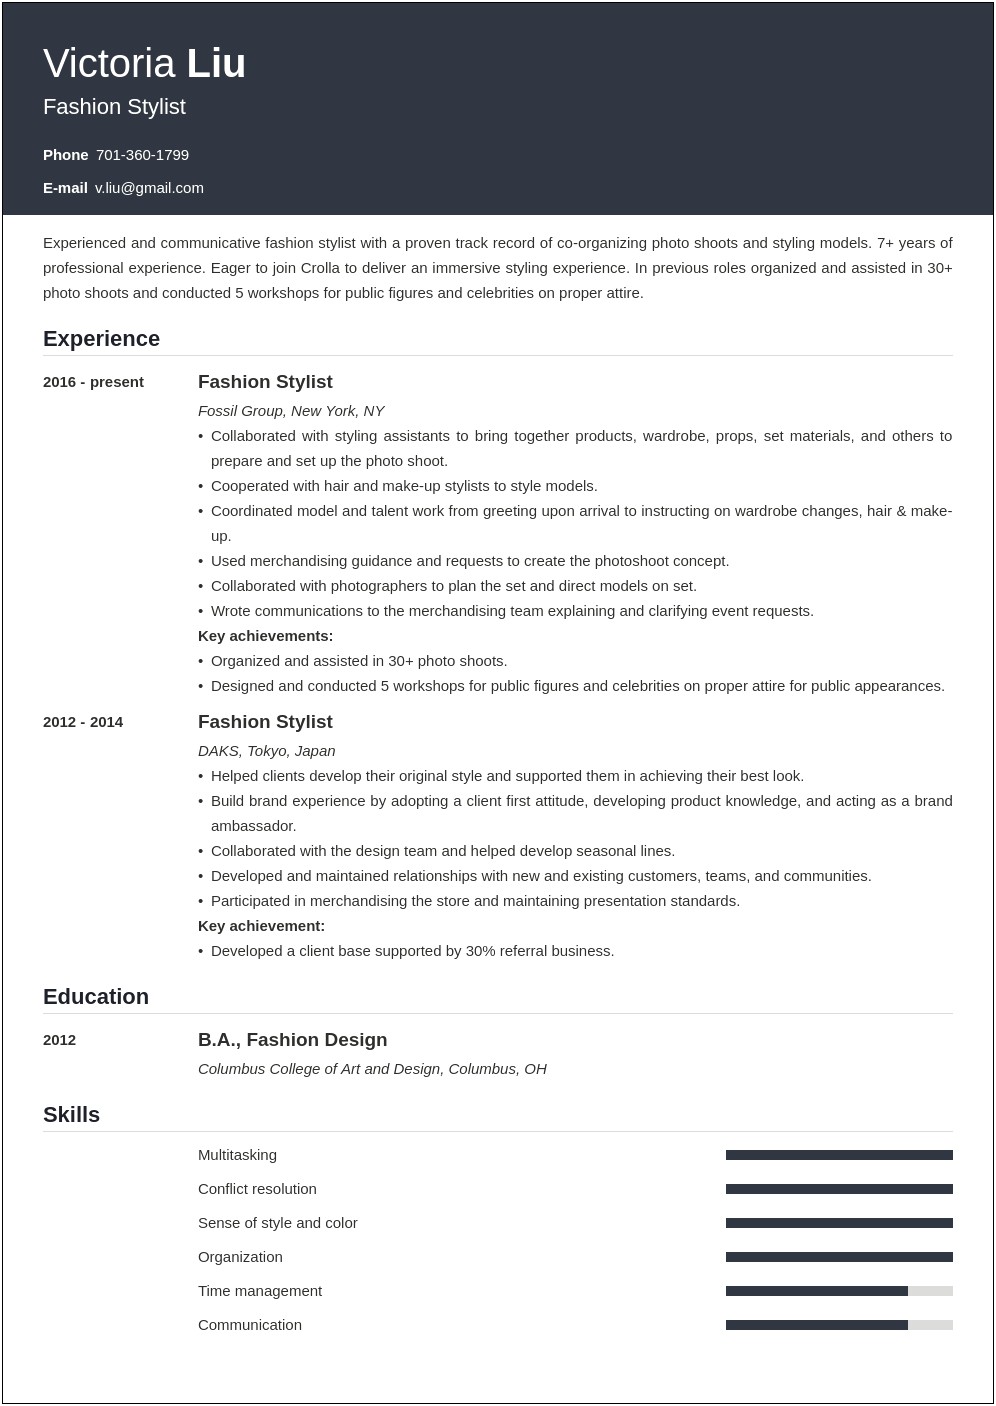 Examples Of Fashion Resume Experience